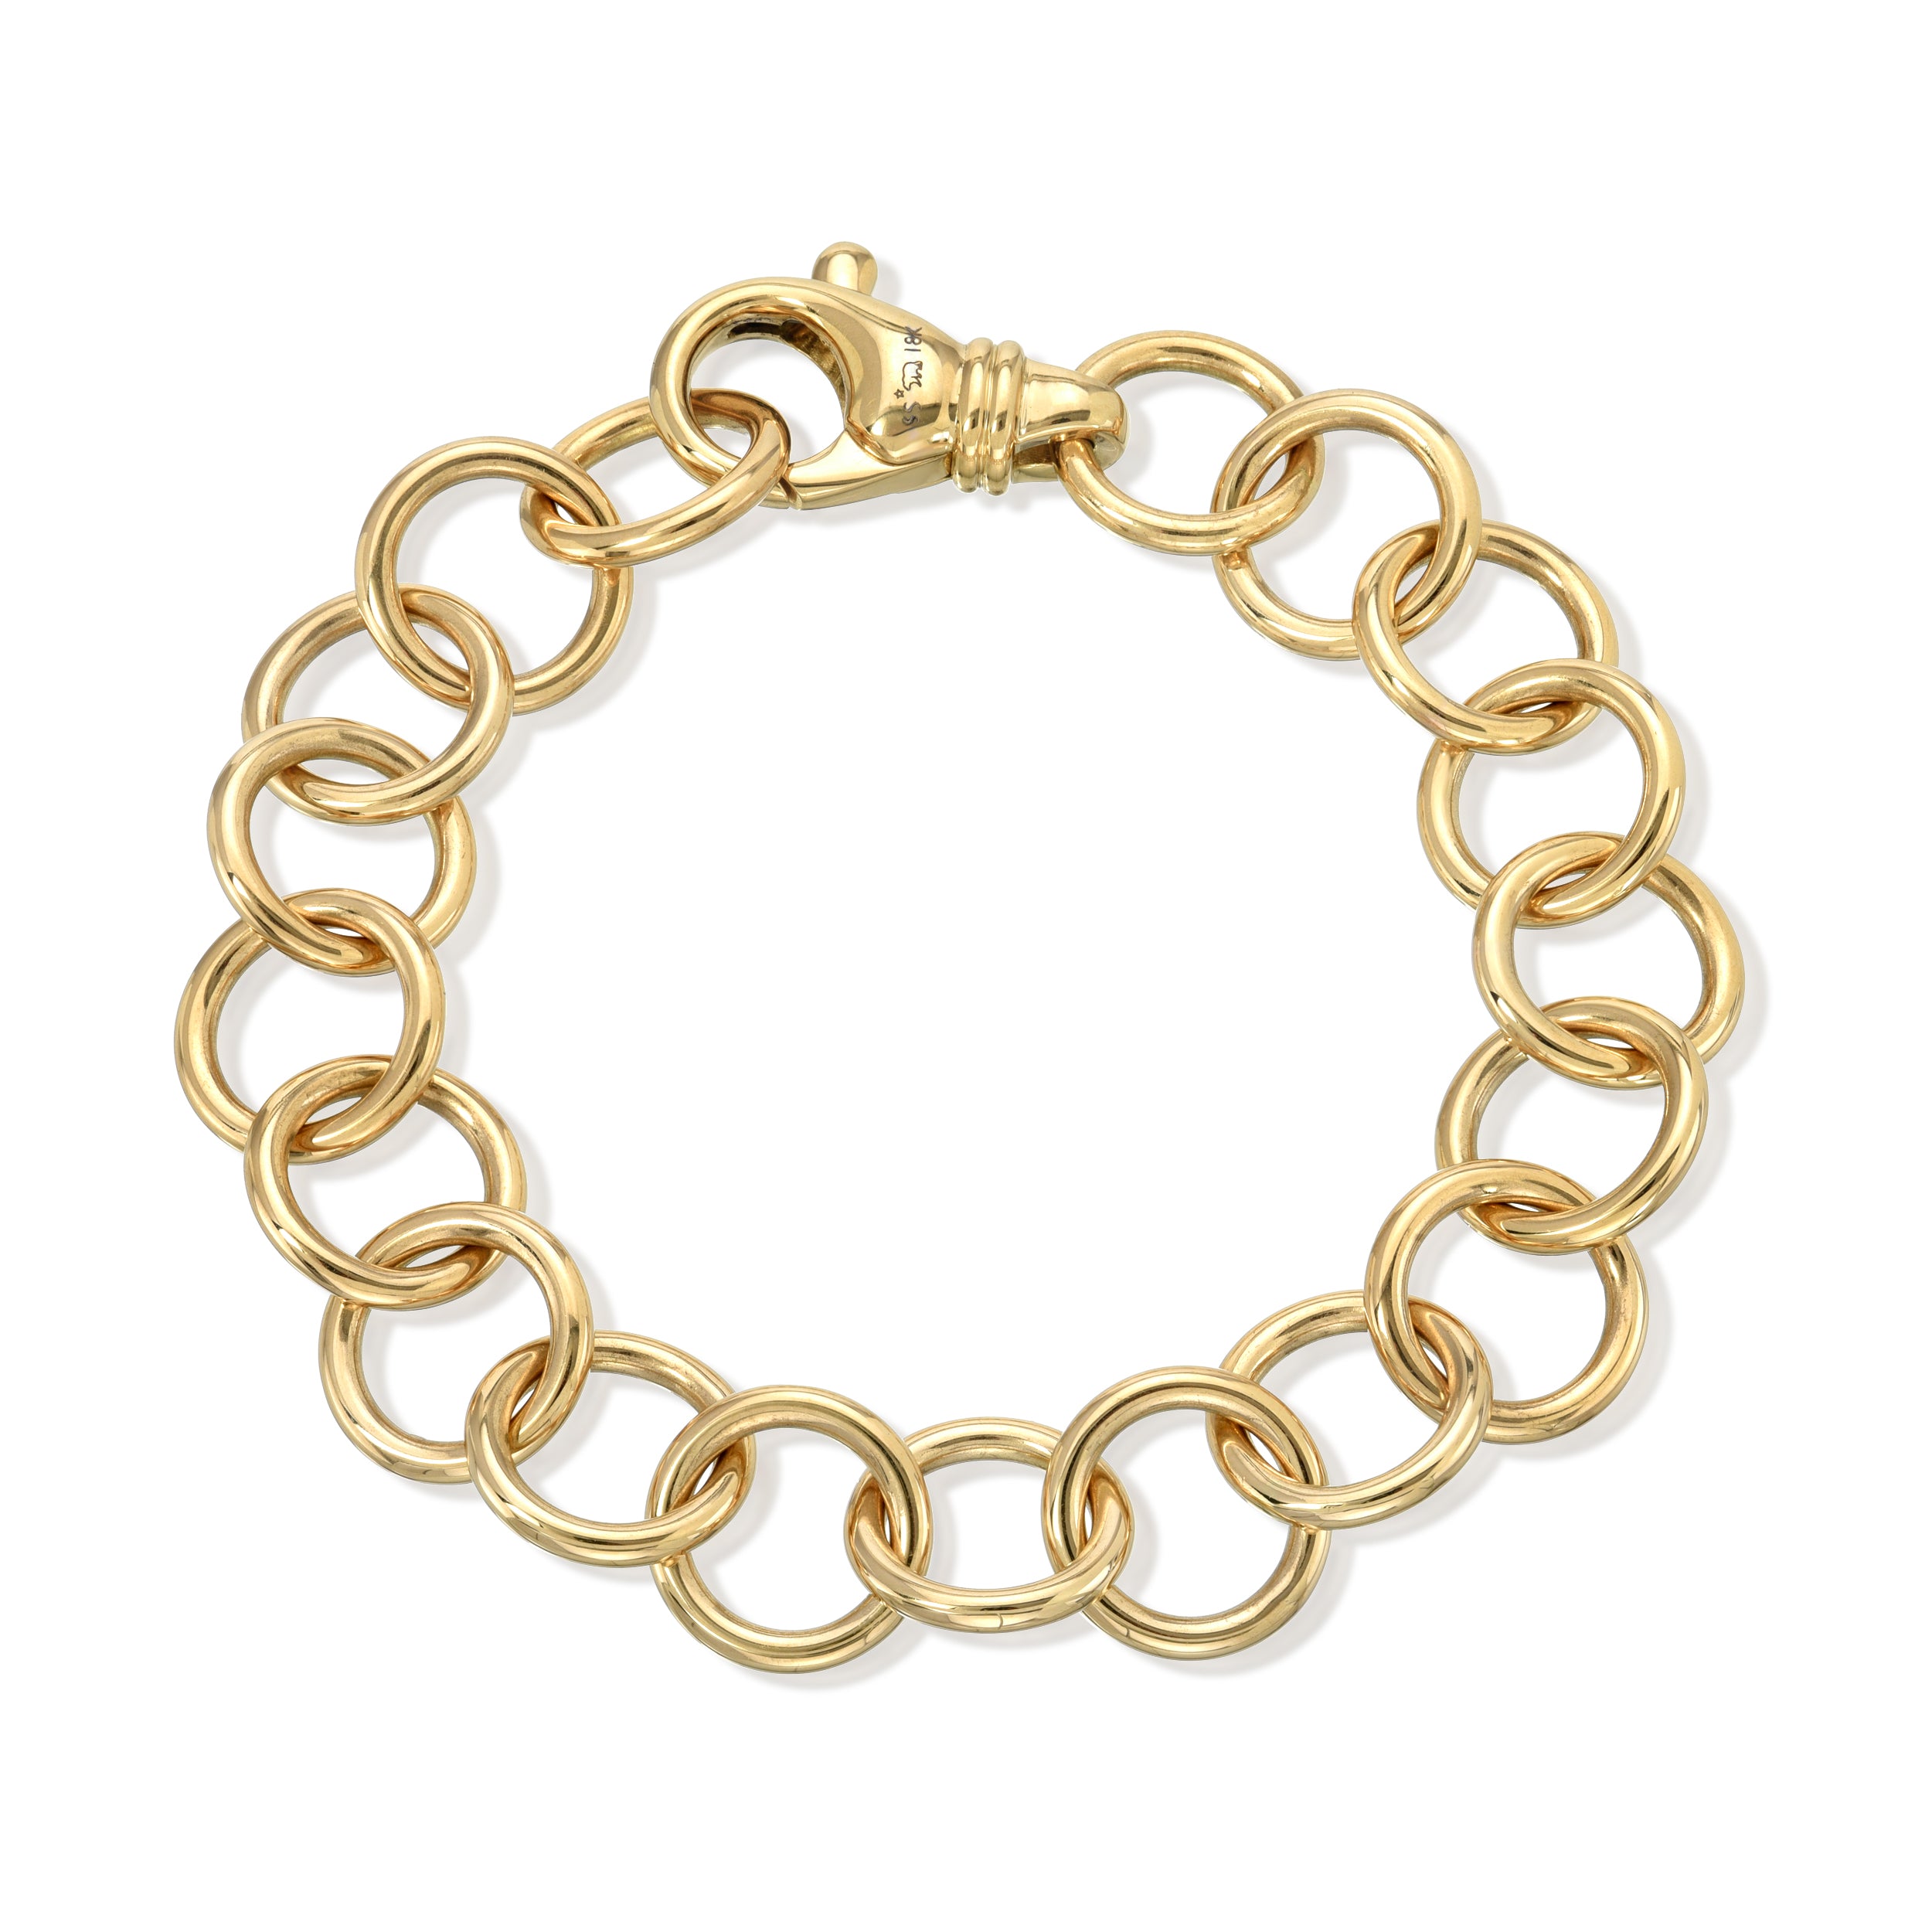 SINGLE STONE CLUB BRACELET featuring Handcrafted 18K gold round link bracelet. Charms sold separately. Bracelet measures 7.5". Please inquire for additional customization.